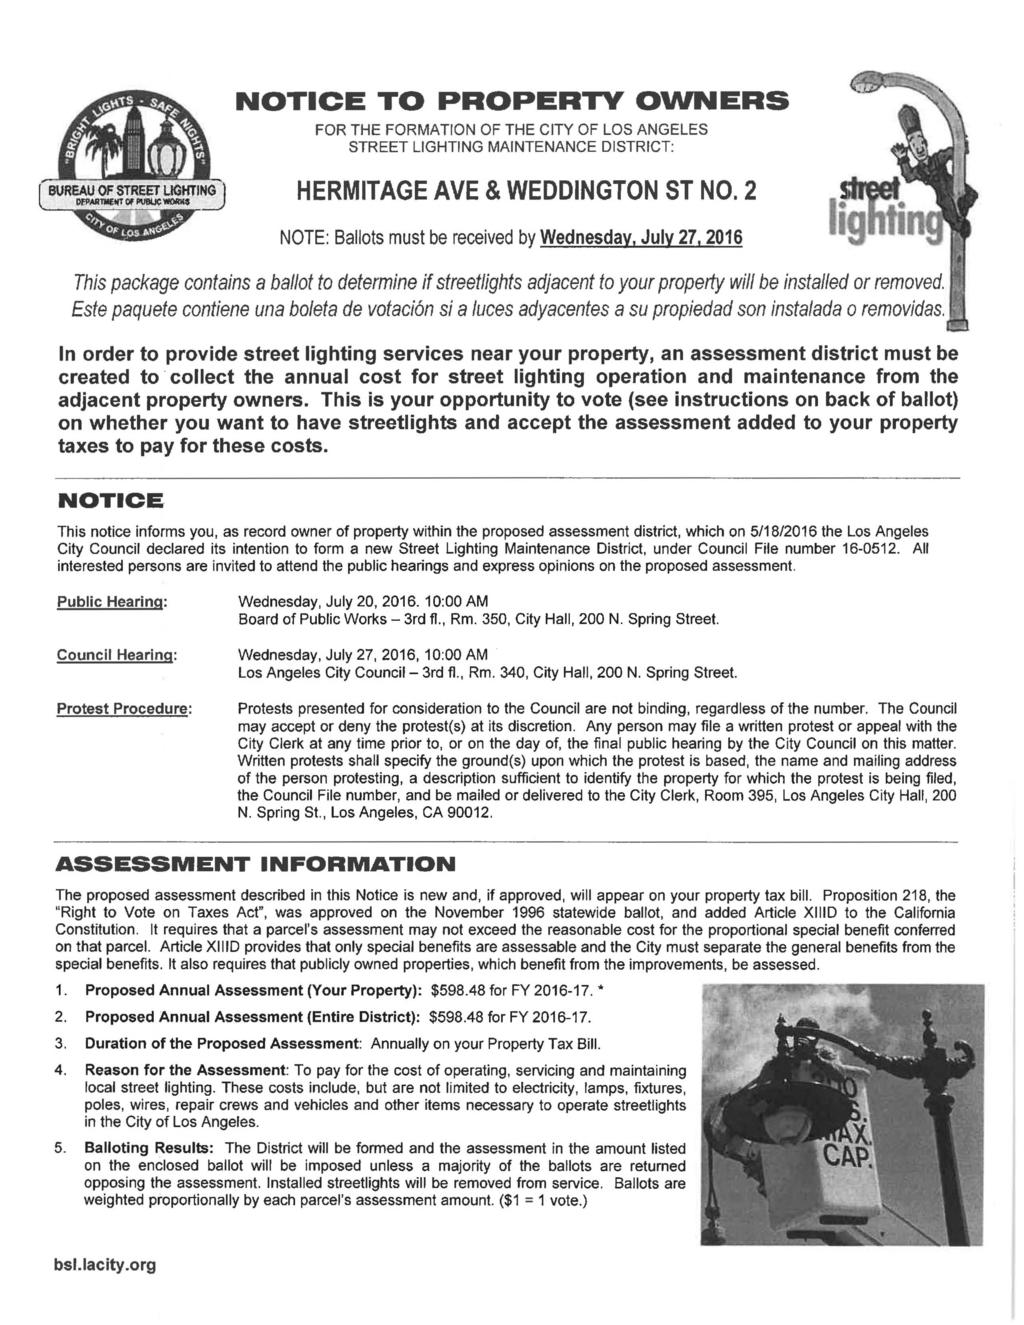 NOTICE TO PROPERTY OWNERS FOR THE FORMATION OF THE CITY OF LOS ANGELES STREET LIGHTING MAINTENANCE DISTRICT: ("bureau of street ughting I { maarmw or mtxmms J HERMITAGE AVE & WEDDINGTON ST NO.